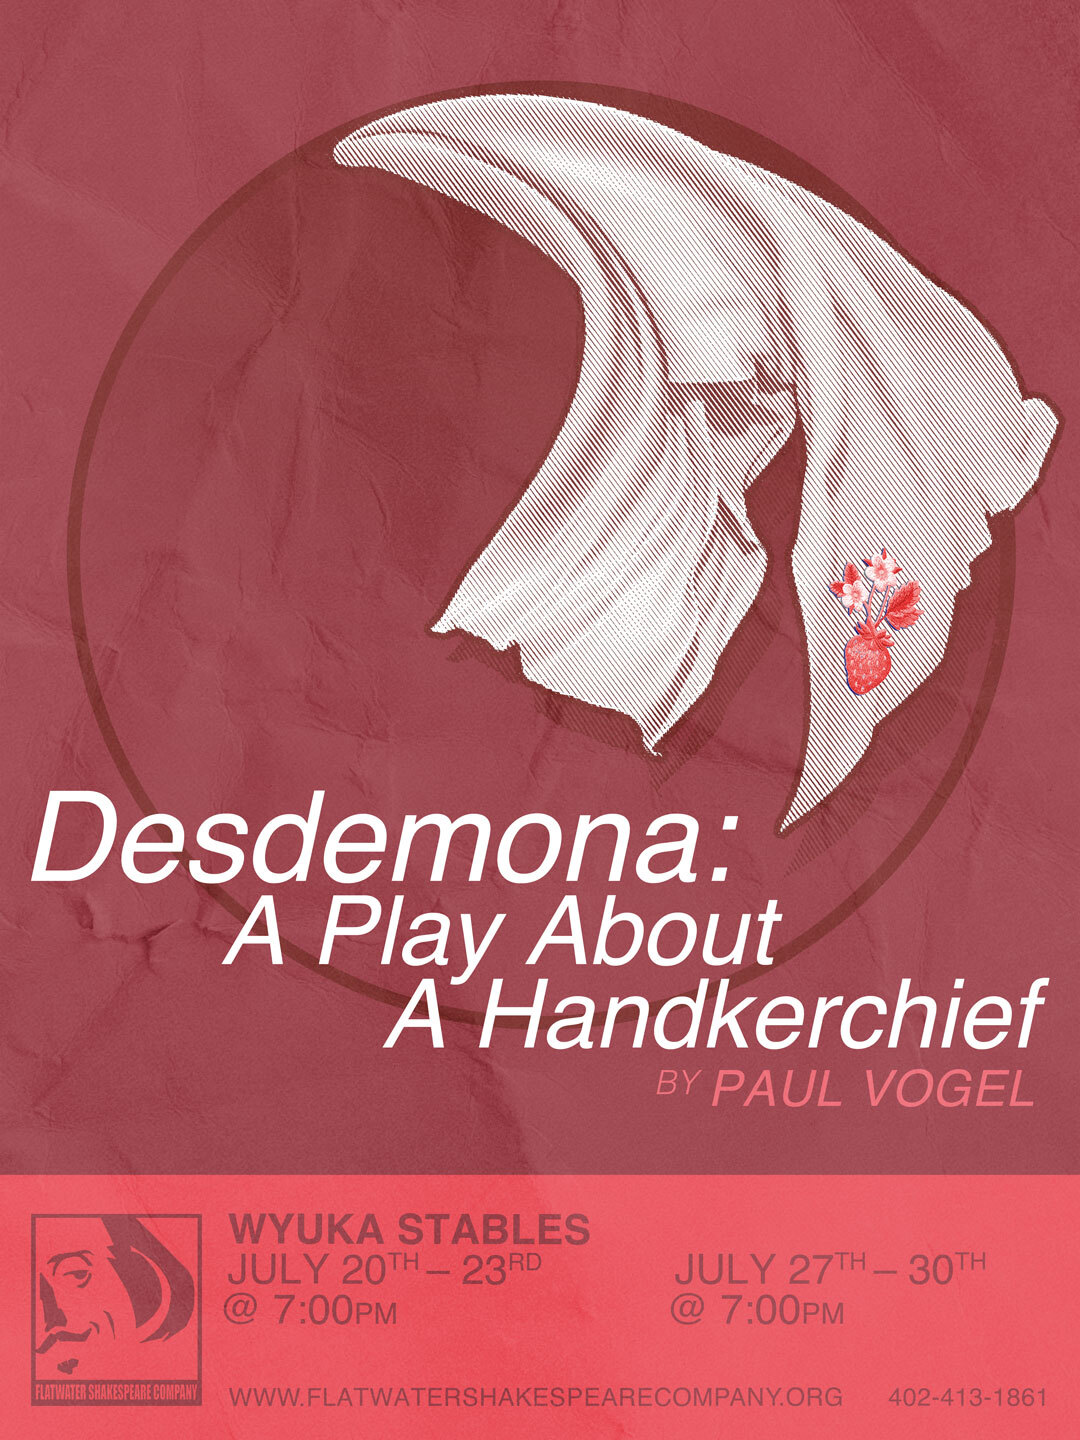 7/20 ADU - ADULT: Thurs. July 20, 2023 | 7:00 p.m. - 10:00 p.m. CST | Wyuka Stables (Desdemona: A Play about a Handkerchief)